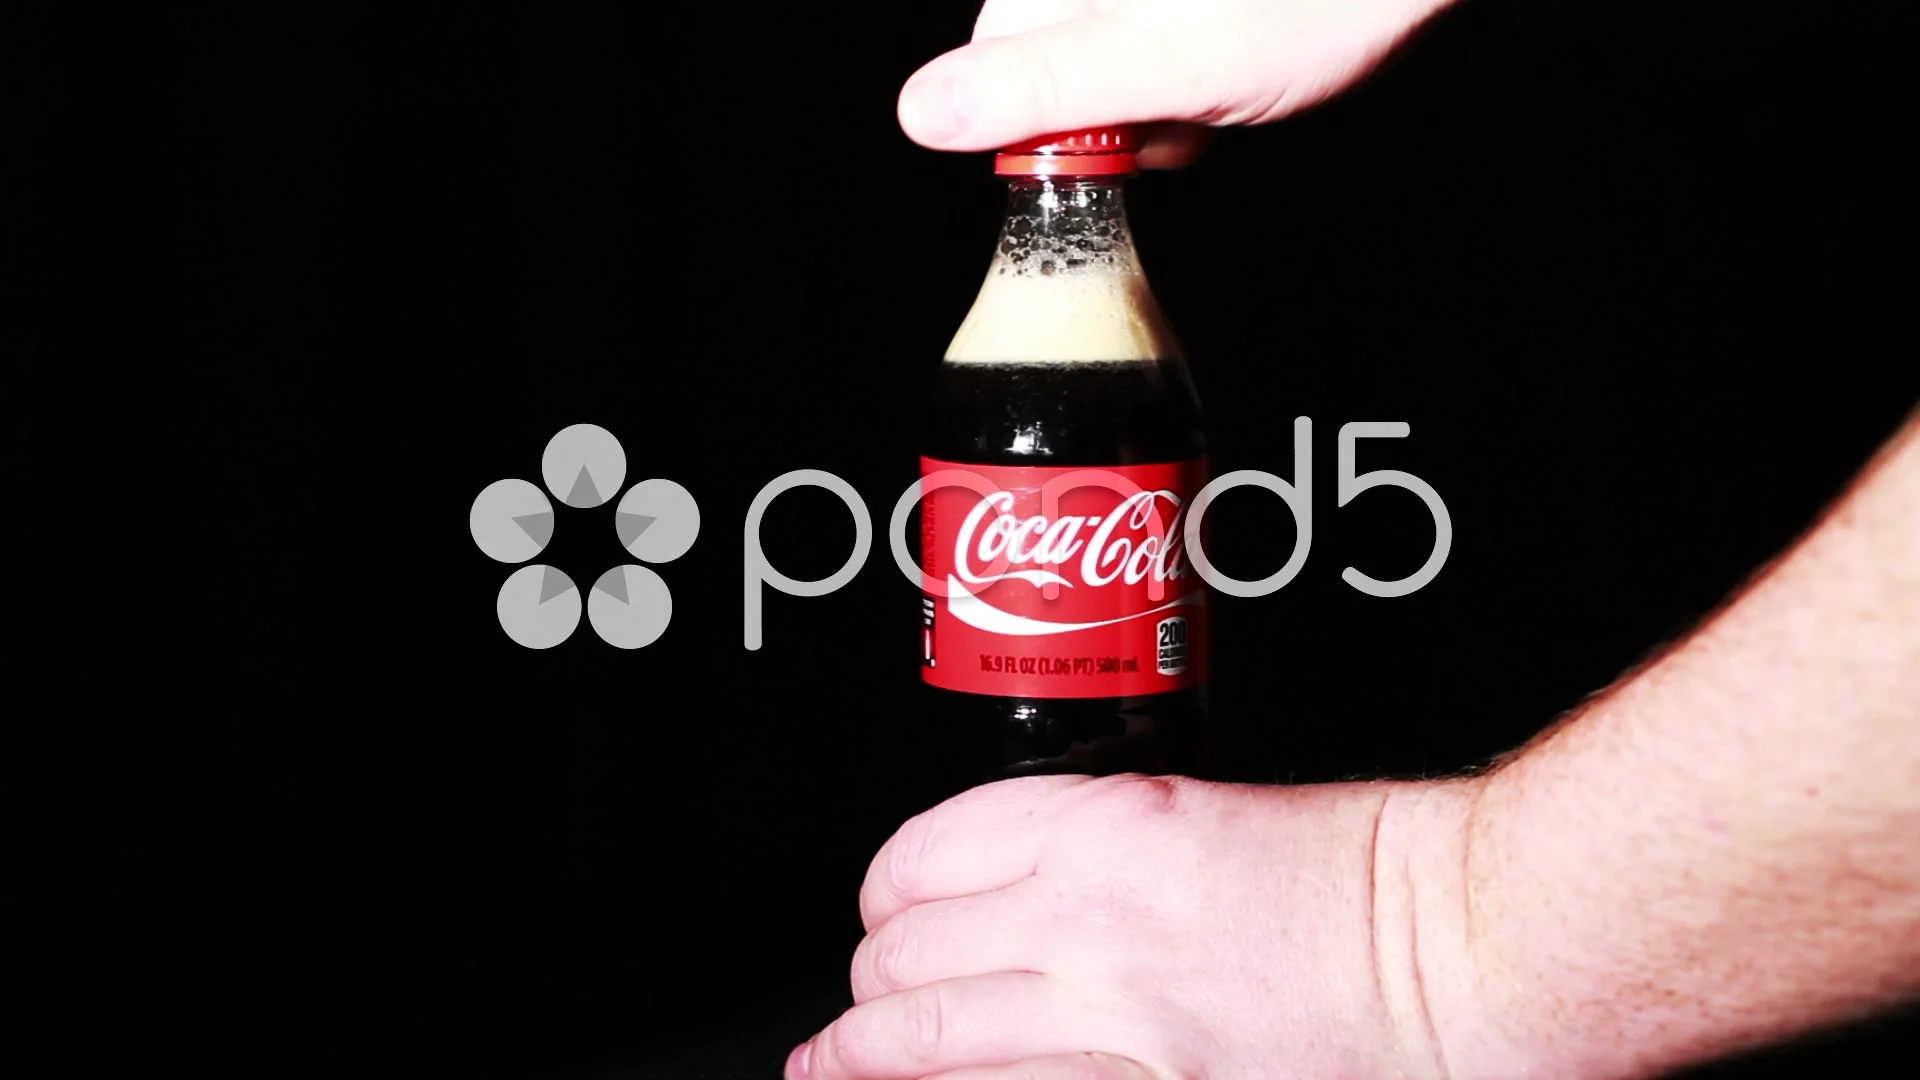 Coca-Cola Bottle Being Open Up | Video | Pond5